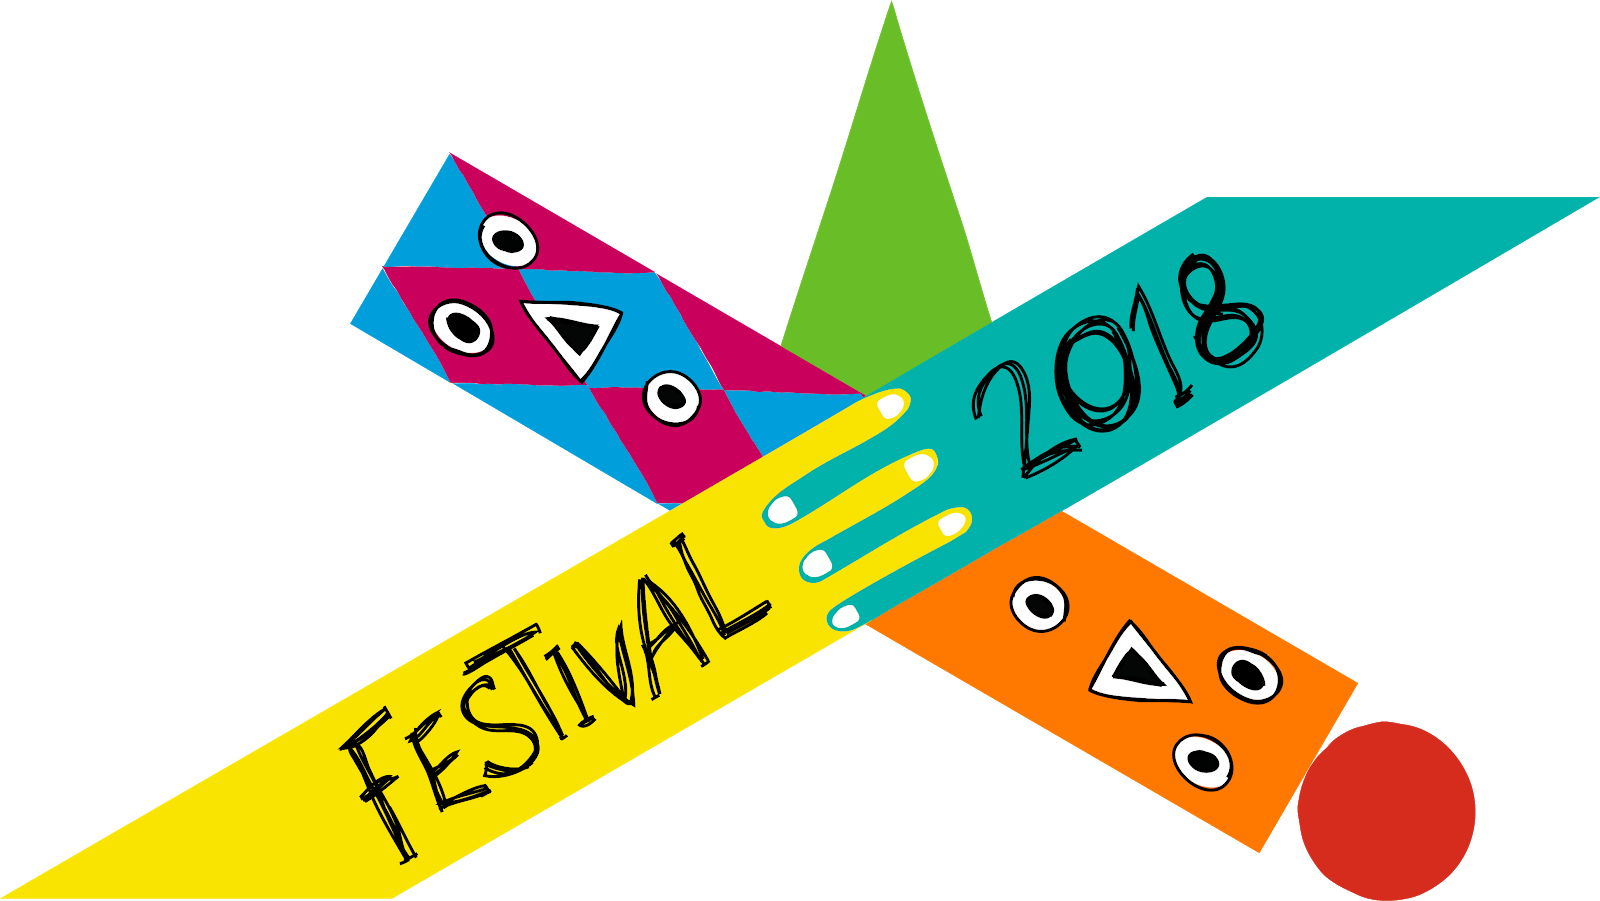 Supported by Festival 2018